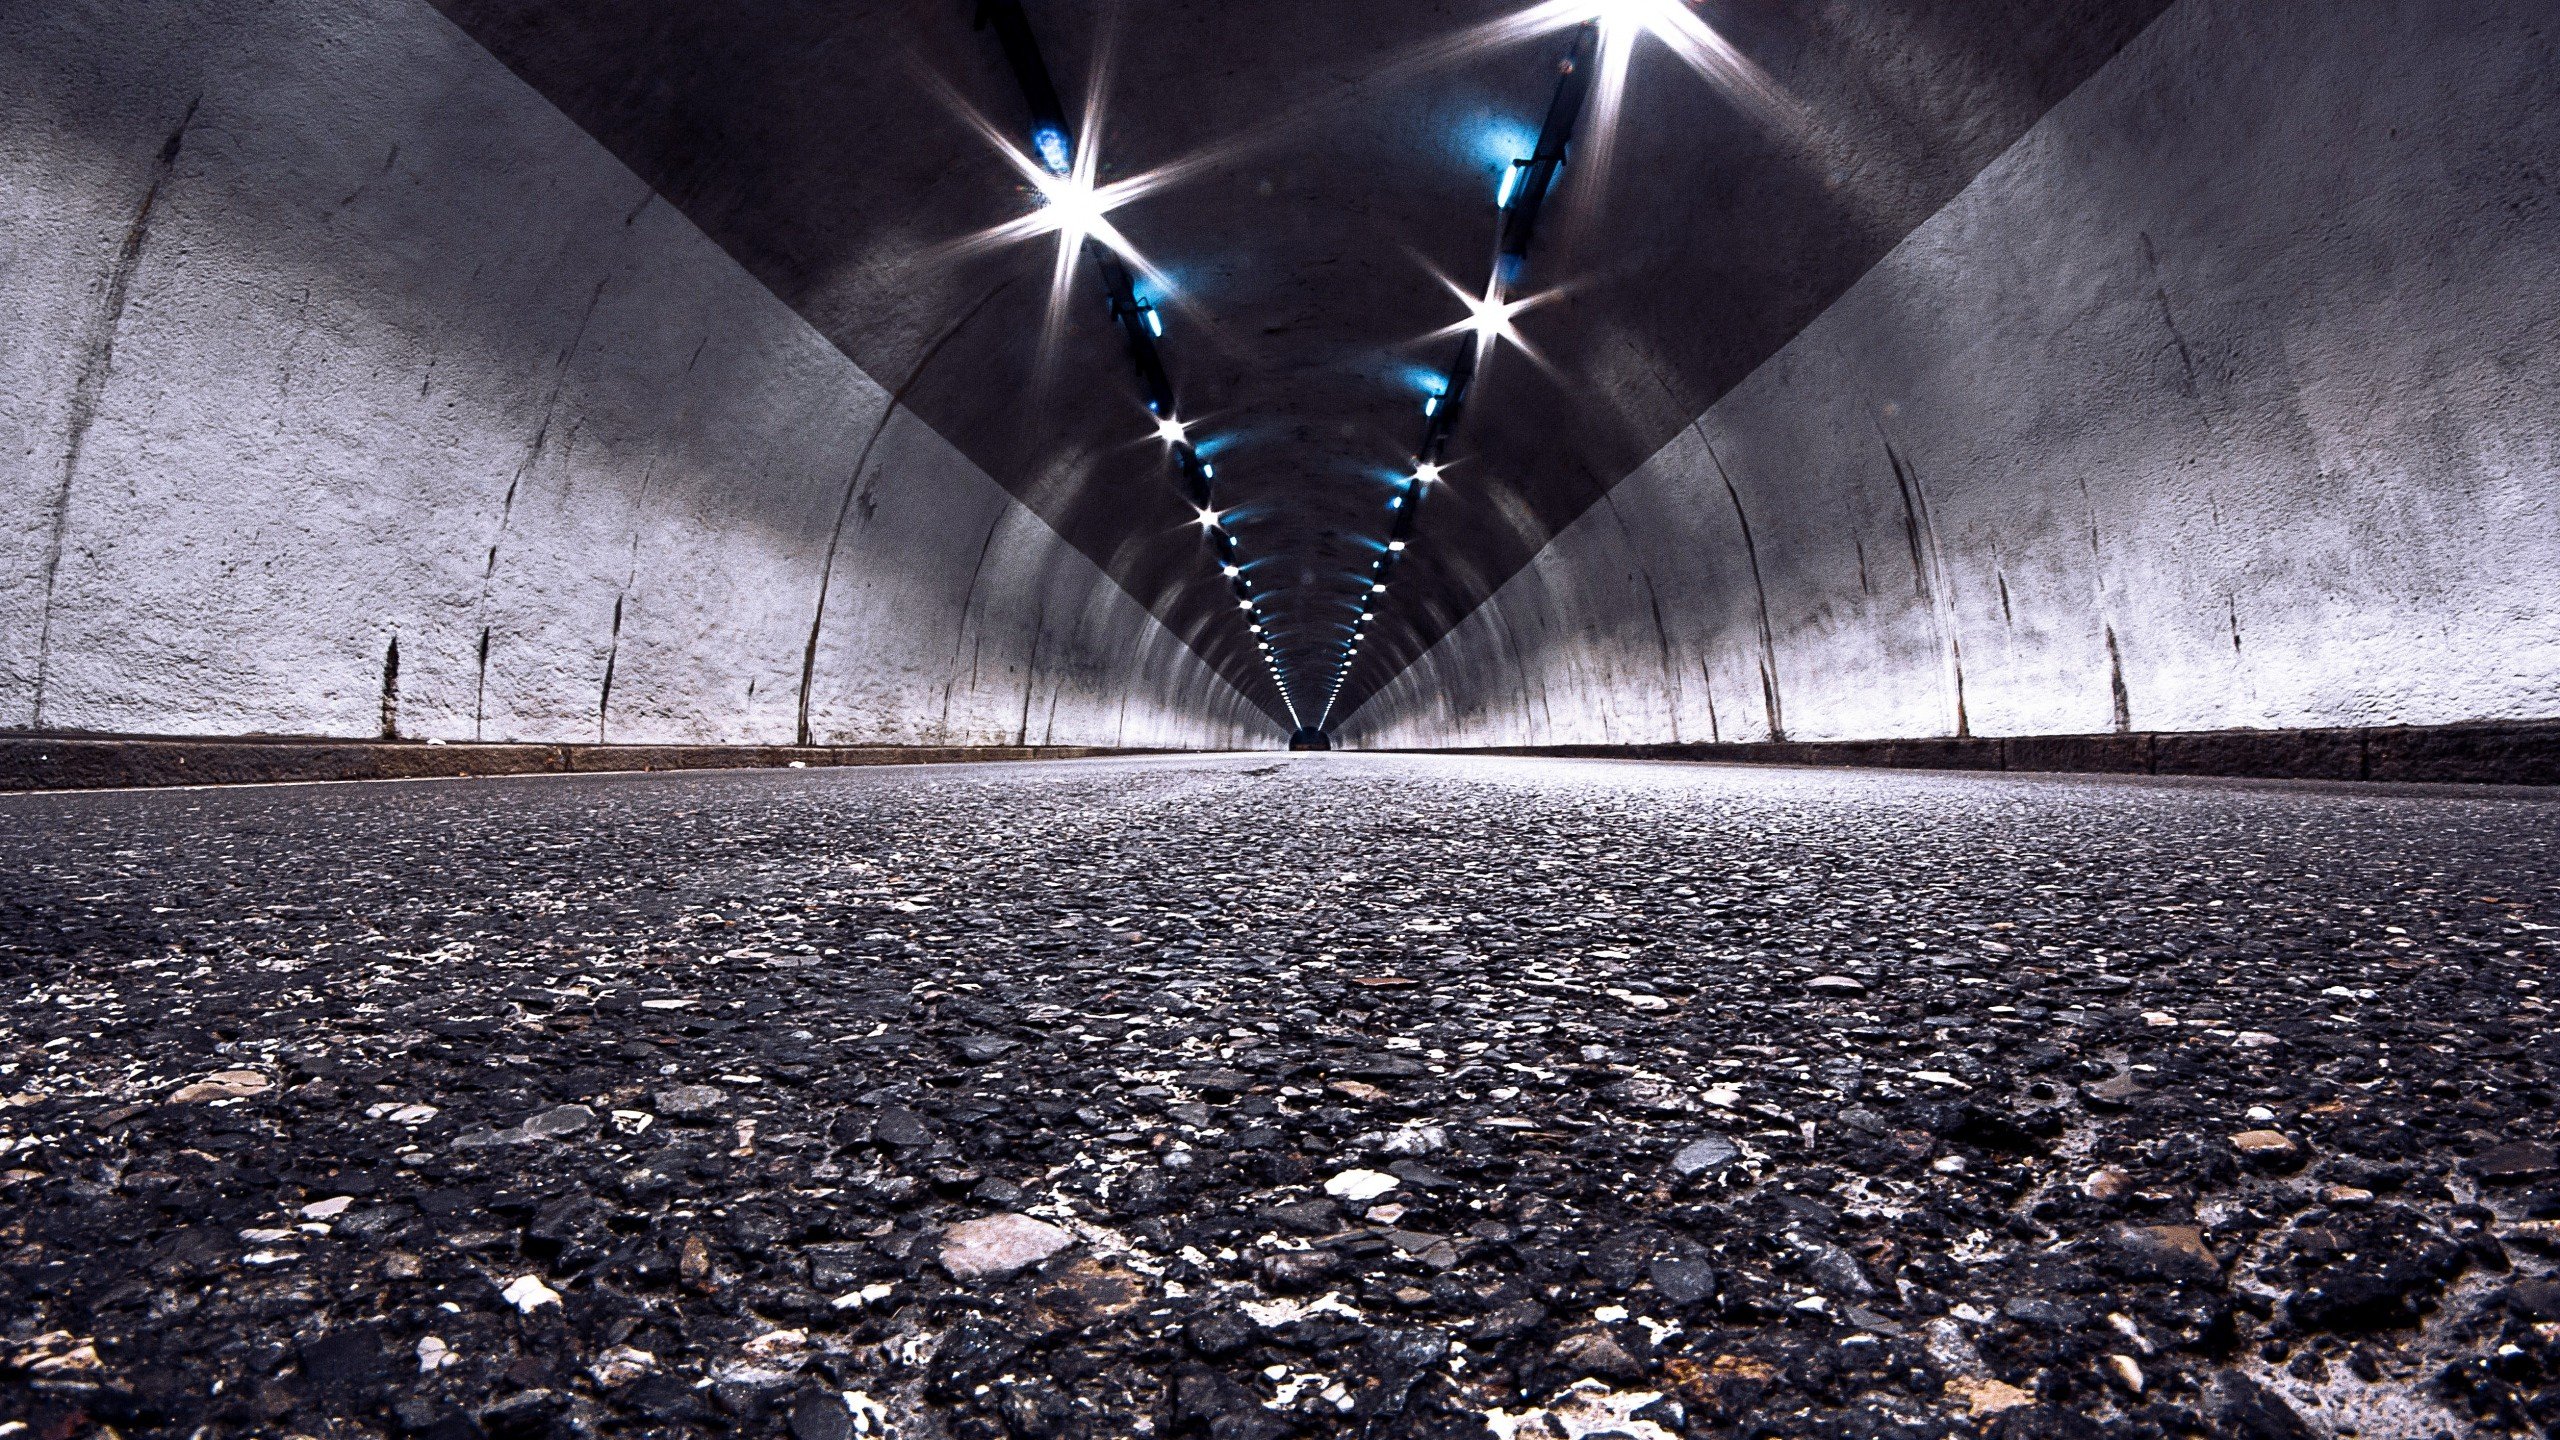 architecture, Interiors, Abandoned, Silent, Road, Tunnel, Lights, Stones, Concrete, Walls, Arch Wallpaper